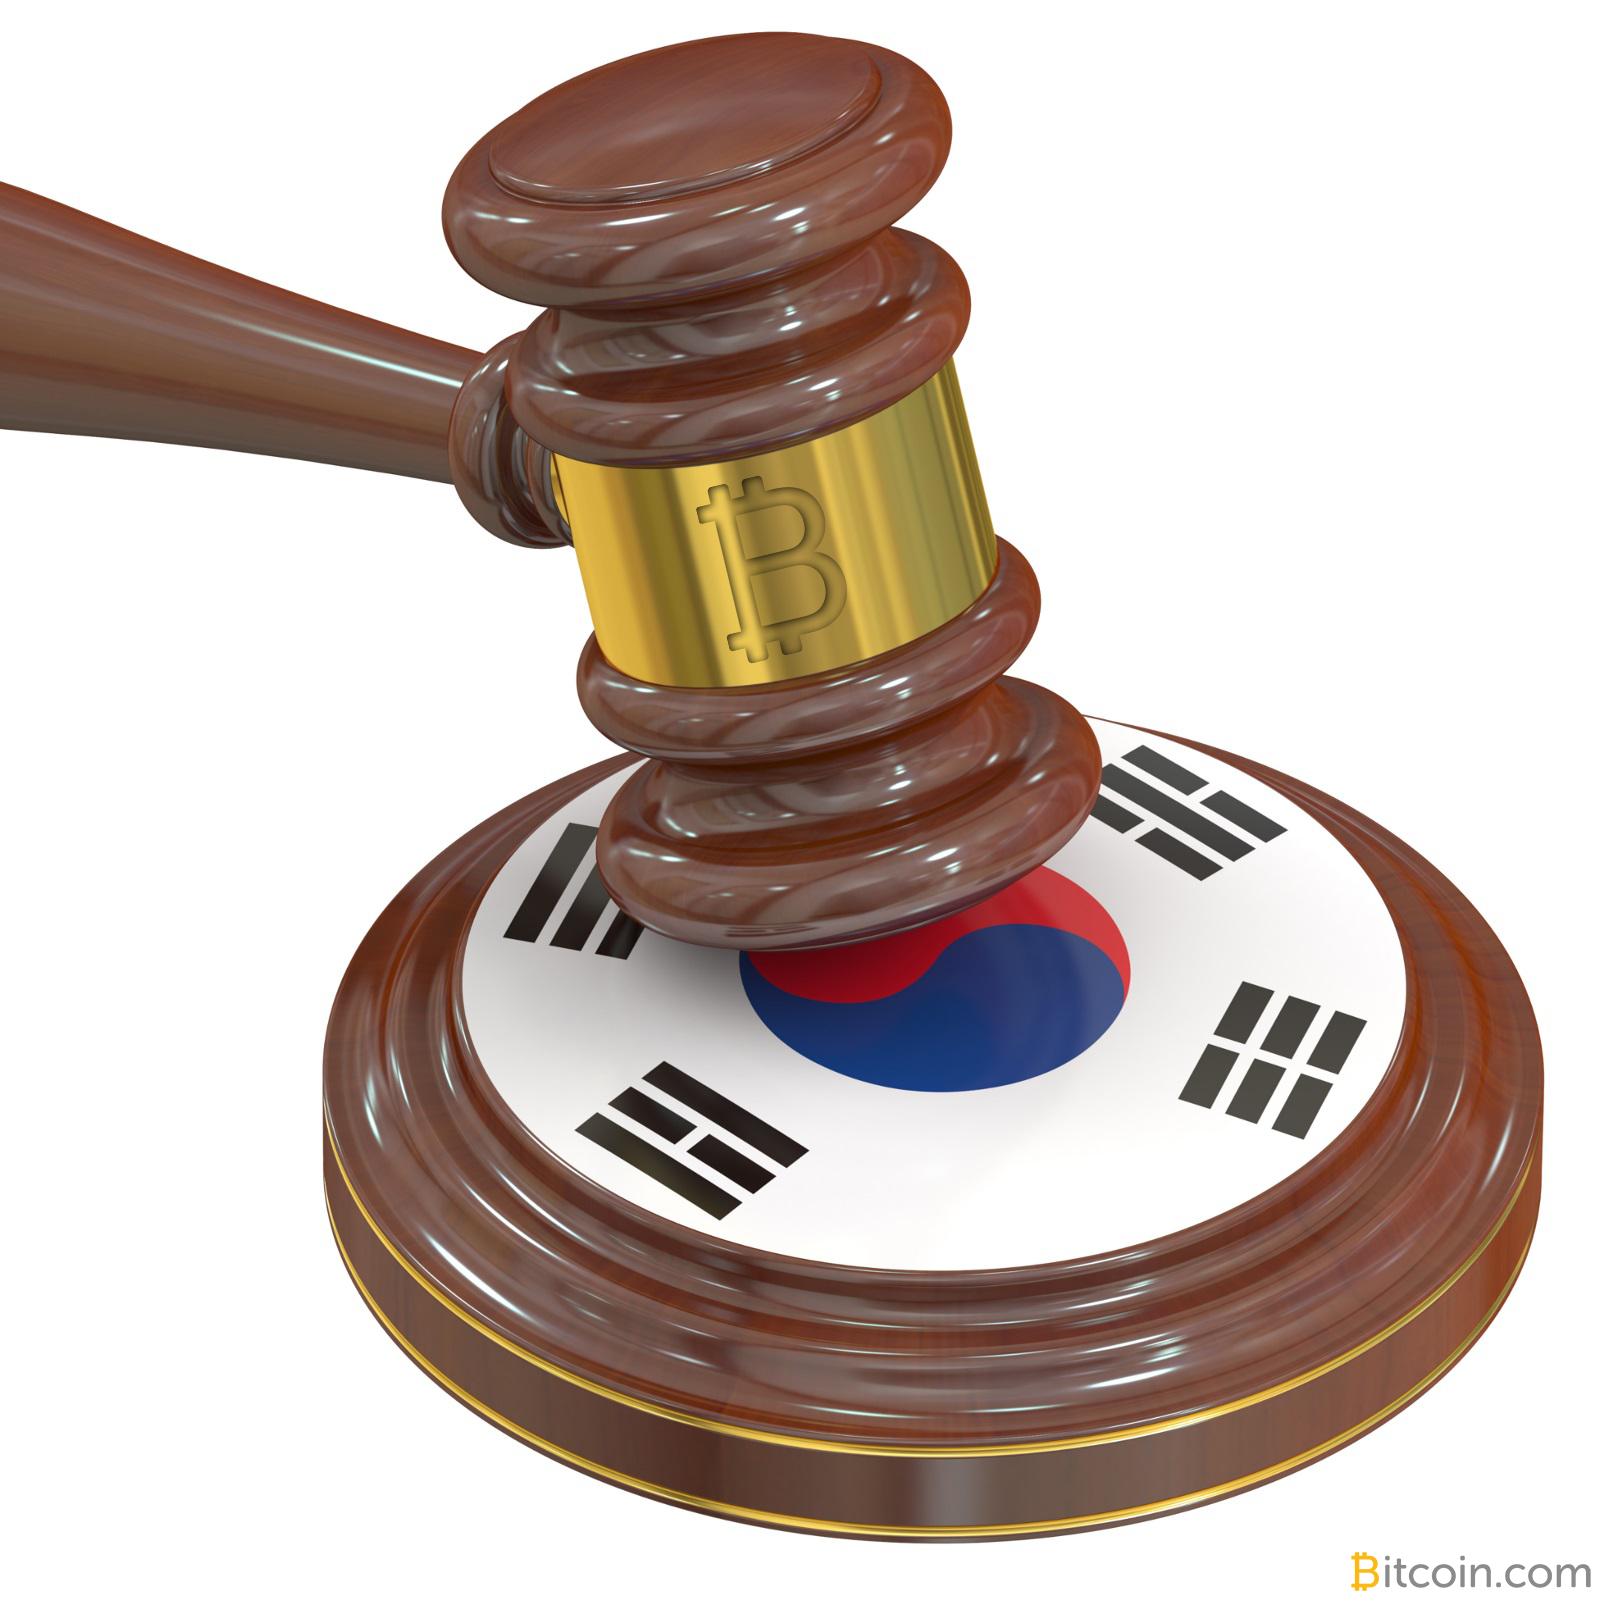 Korean Court Rules Bitcoin Cannot Be Confiscated